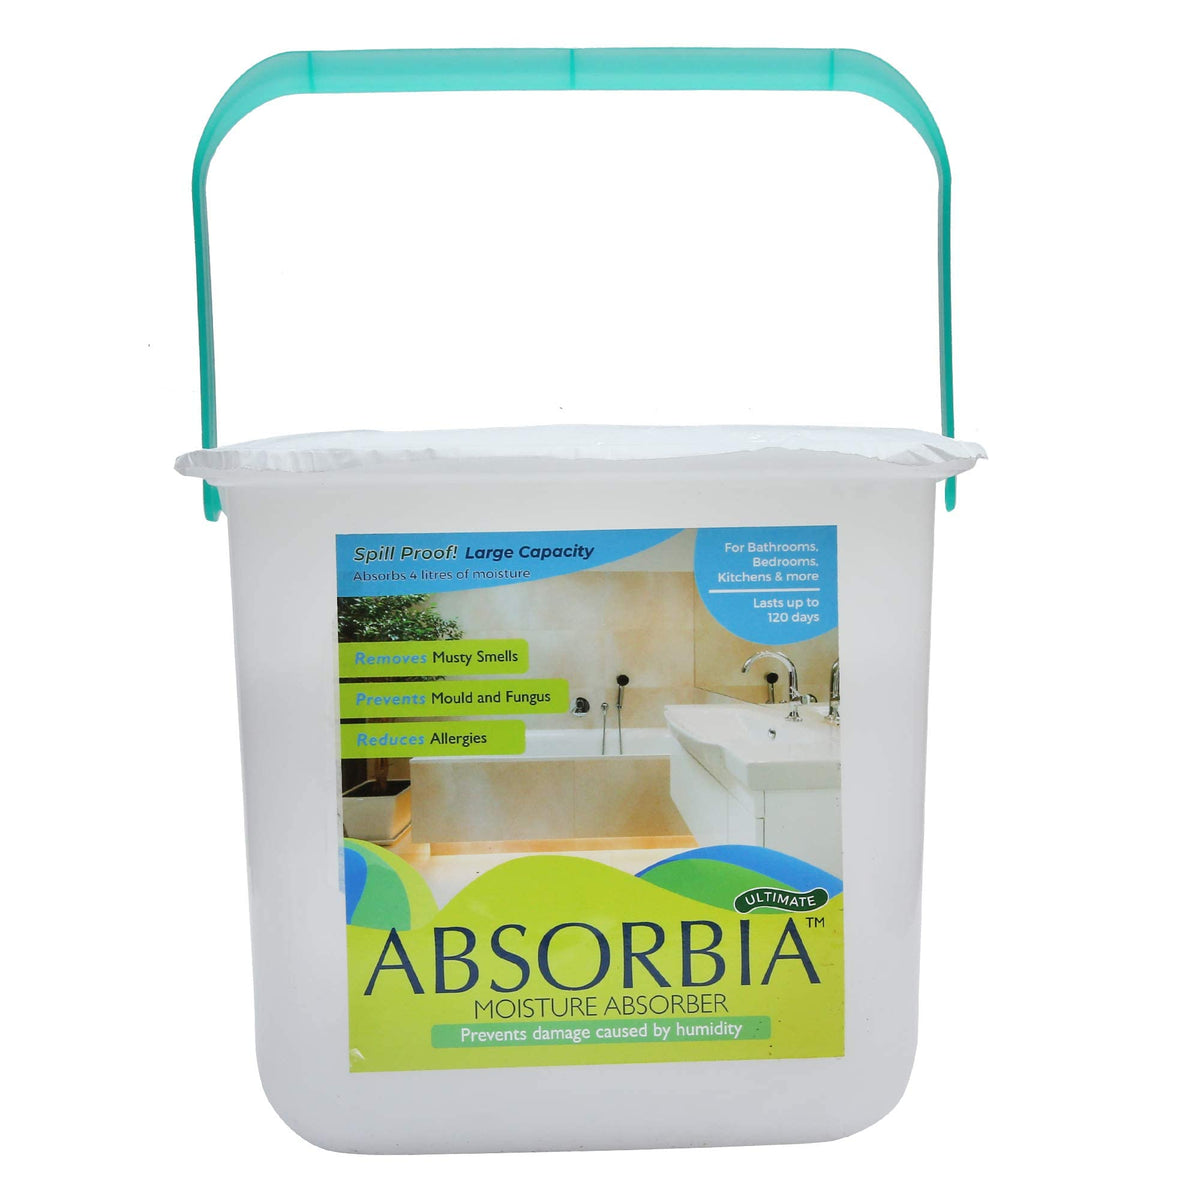 Absorbia Moisture Absorber | Absorbia Ultimate (4L) | Pack of 4 Non-Electric Dehumidier for Large Areas, Bedrooms, Living Room Dining Room| Fights Against Moisture, Mould, Fungus Musty smells‚Ä¶